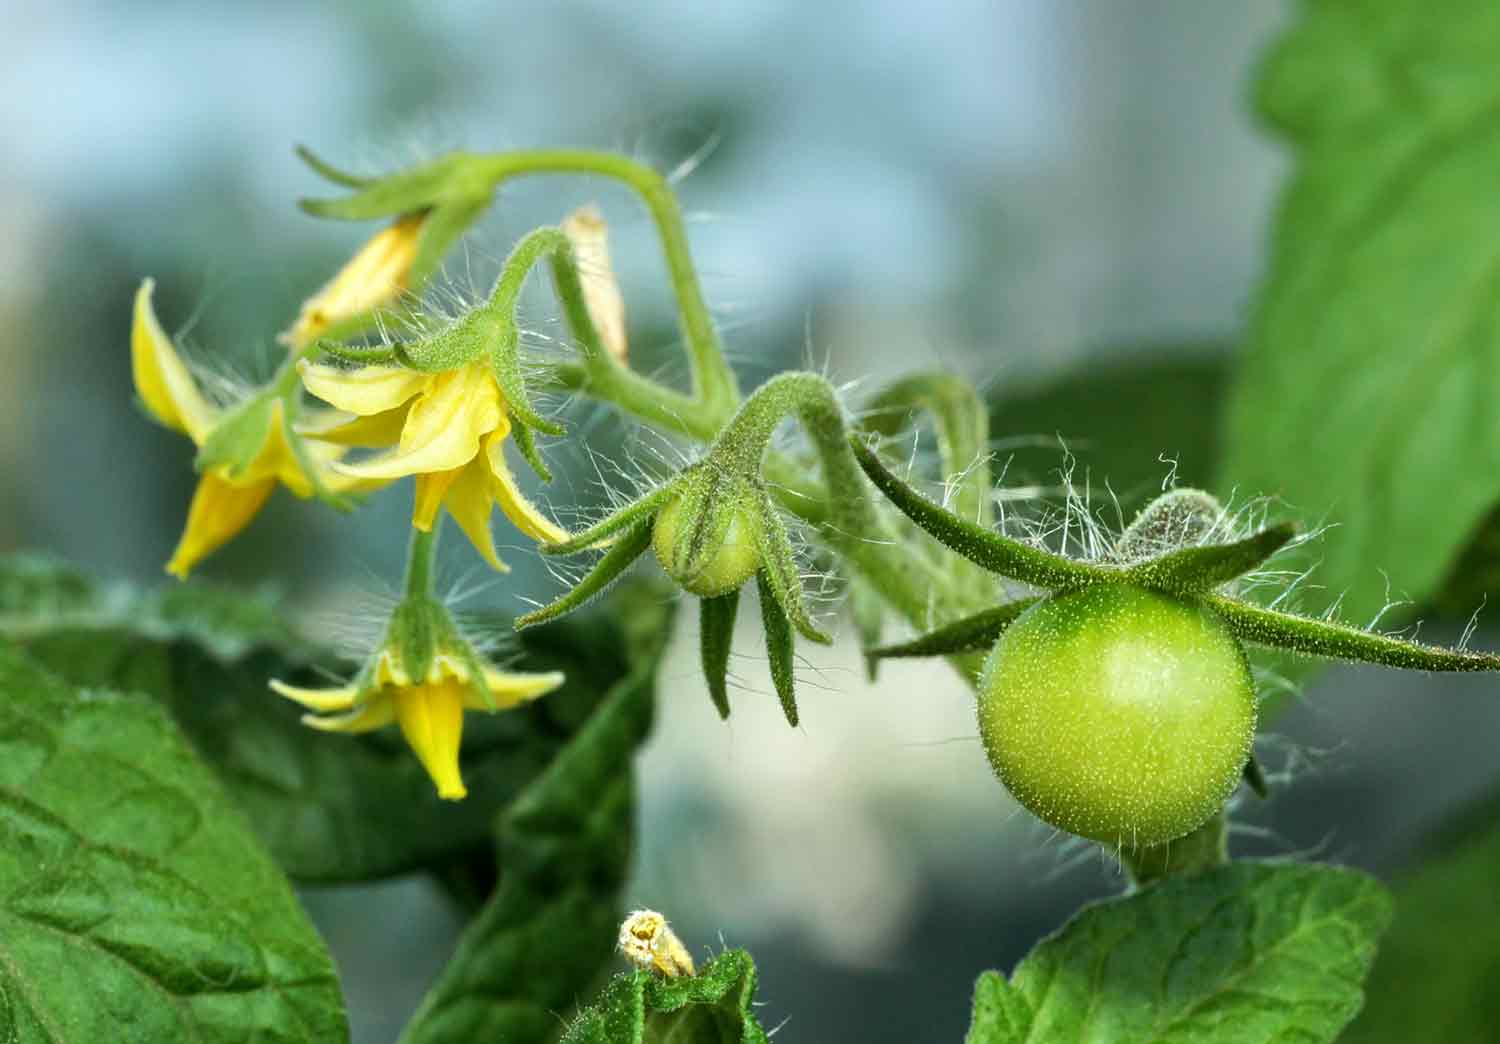 Tomato flowers and young fruit on a branch.